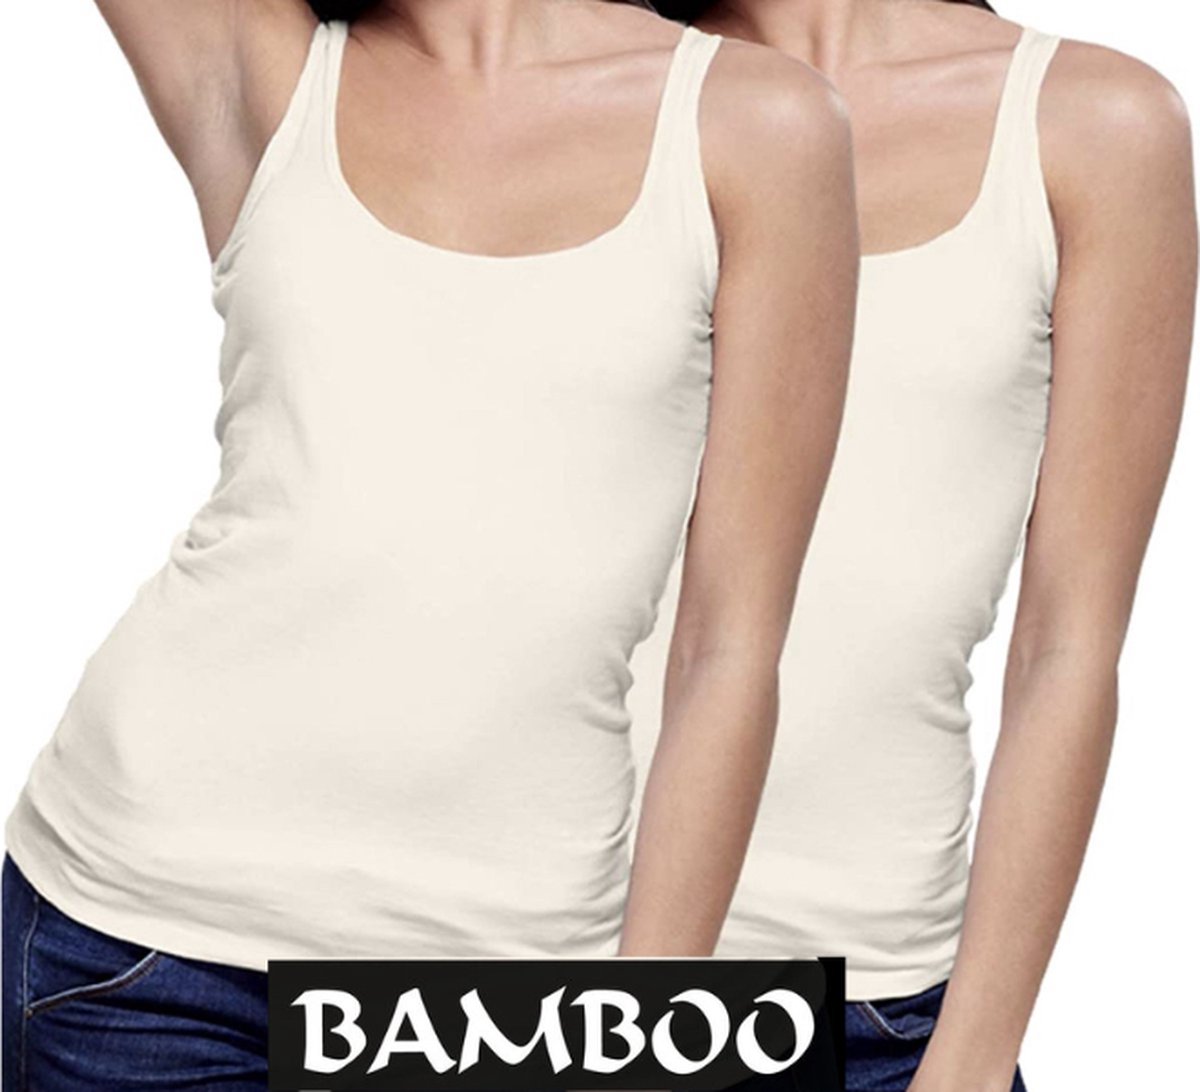 Bamboe dames top (tank top model) – 2 paar - dames – 95% bamboe – superzacht – champagne – maat S